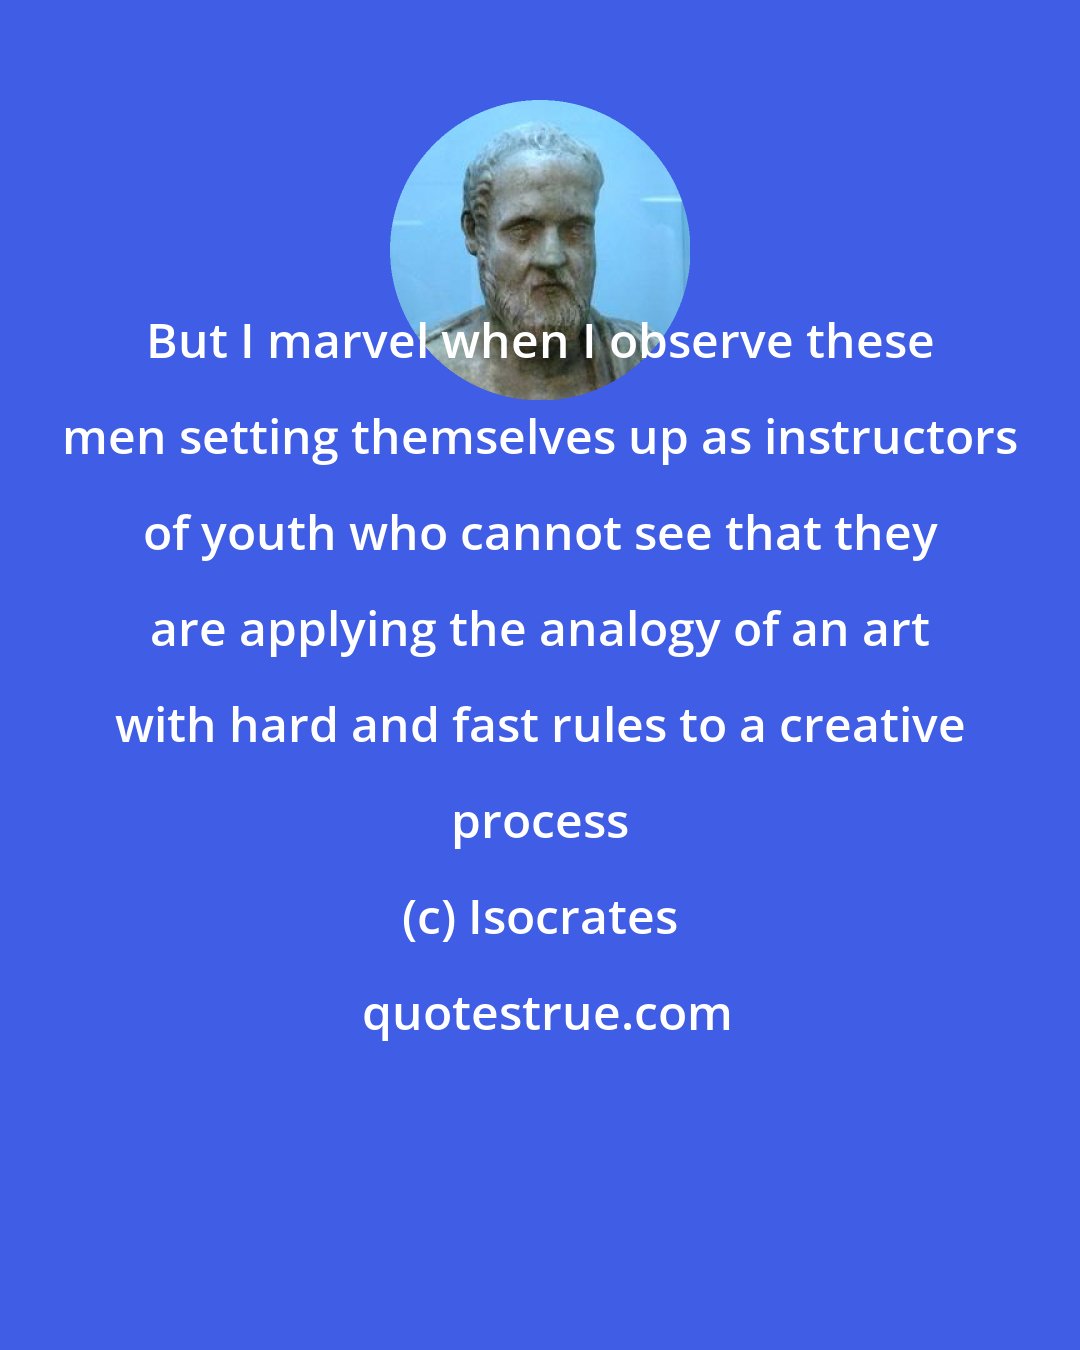 Isocrates: But I marvel when I observe these men setting themselves up as instructors of youth who cannot see that they are applying the analogy of an art with hard and fast rules to a creative process